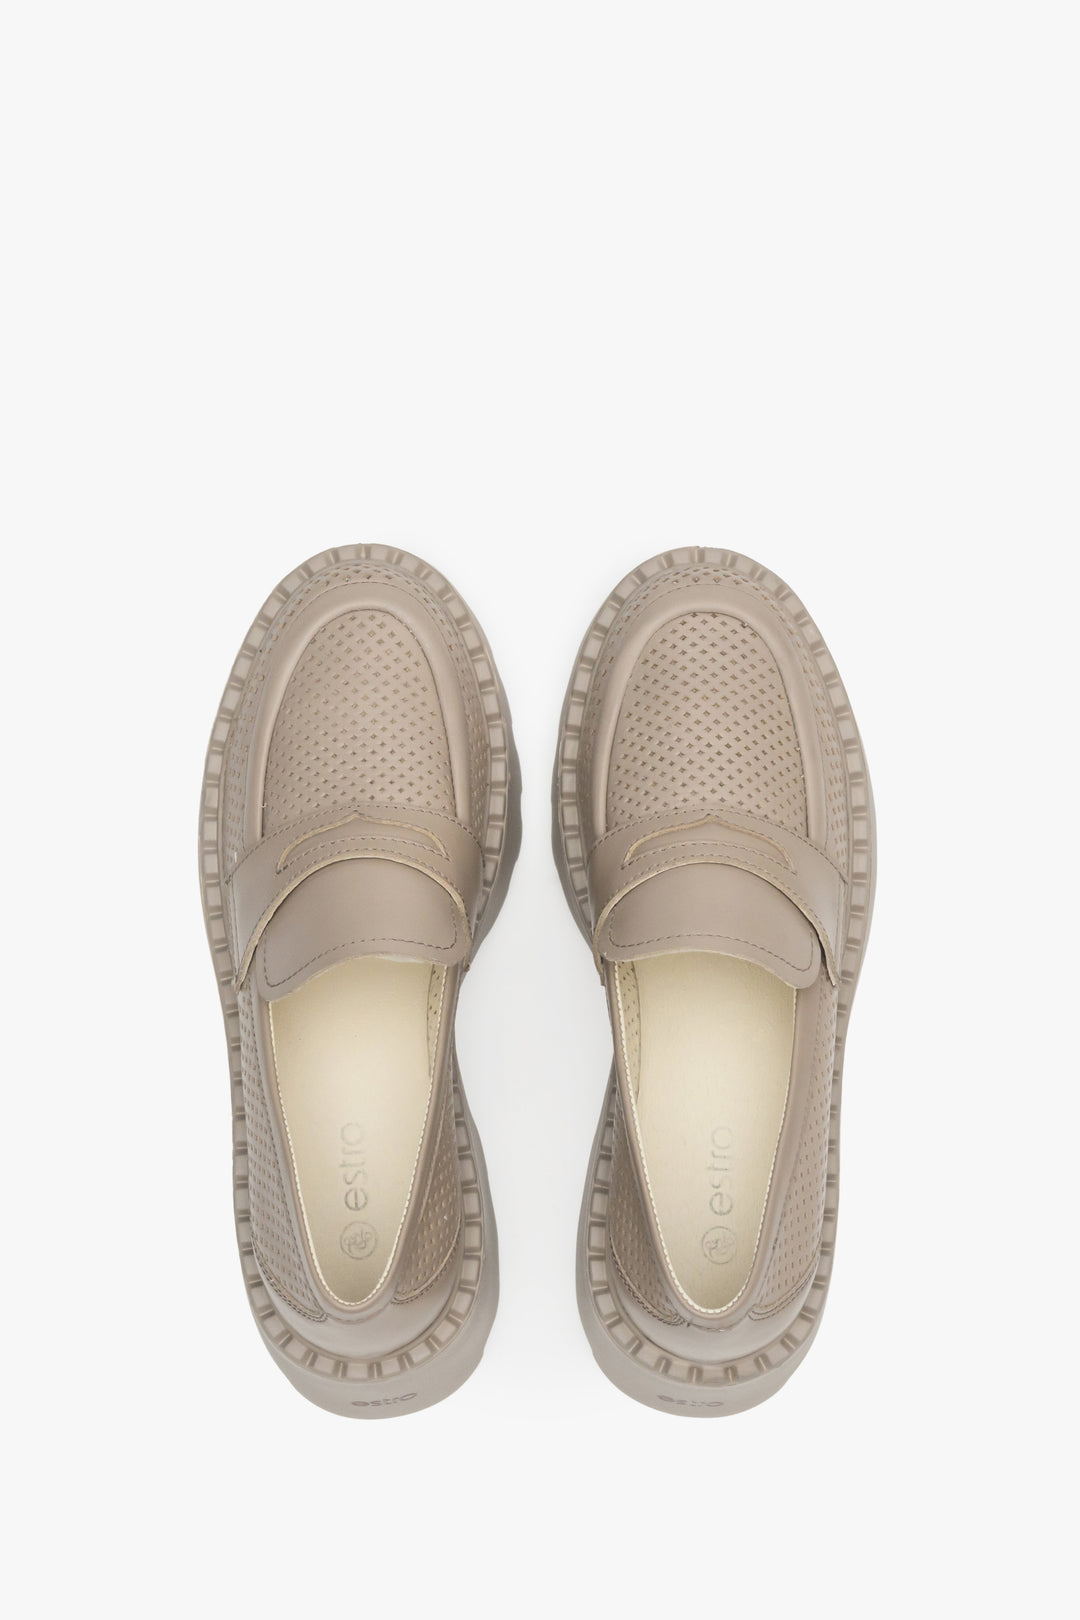 Women's leather loafers with perforation in beige color - shoe presentation from above.